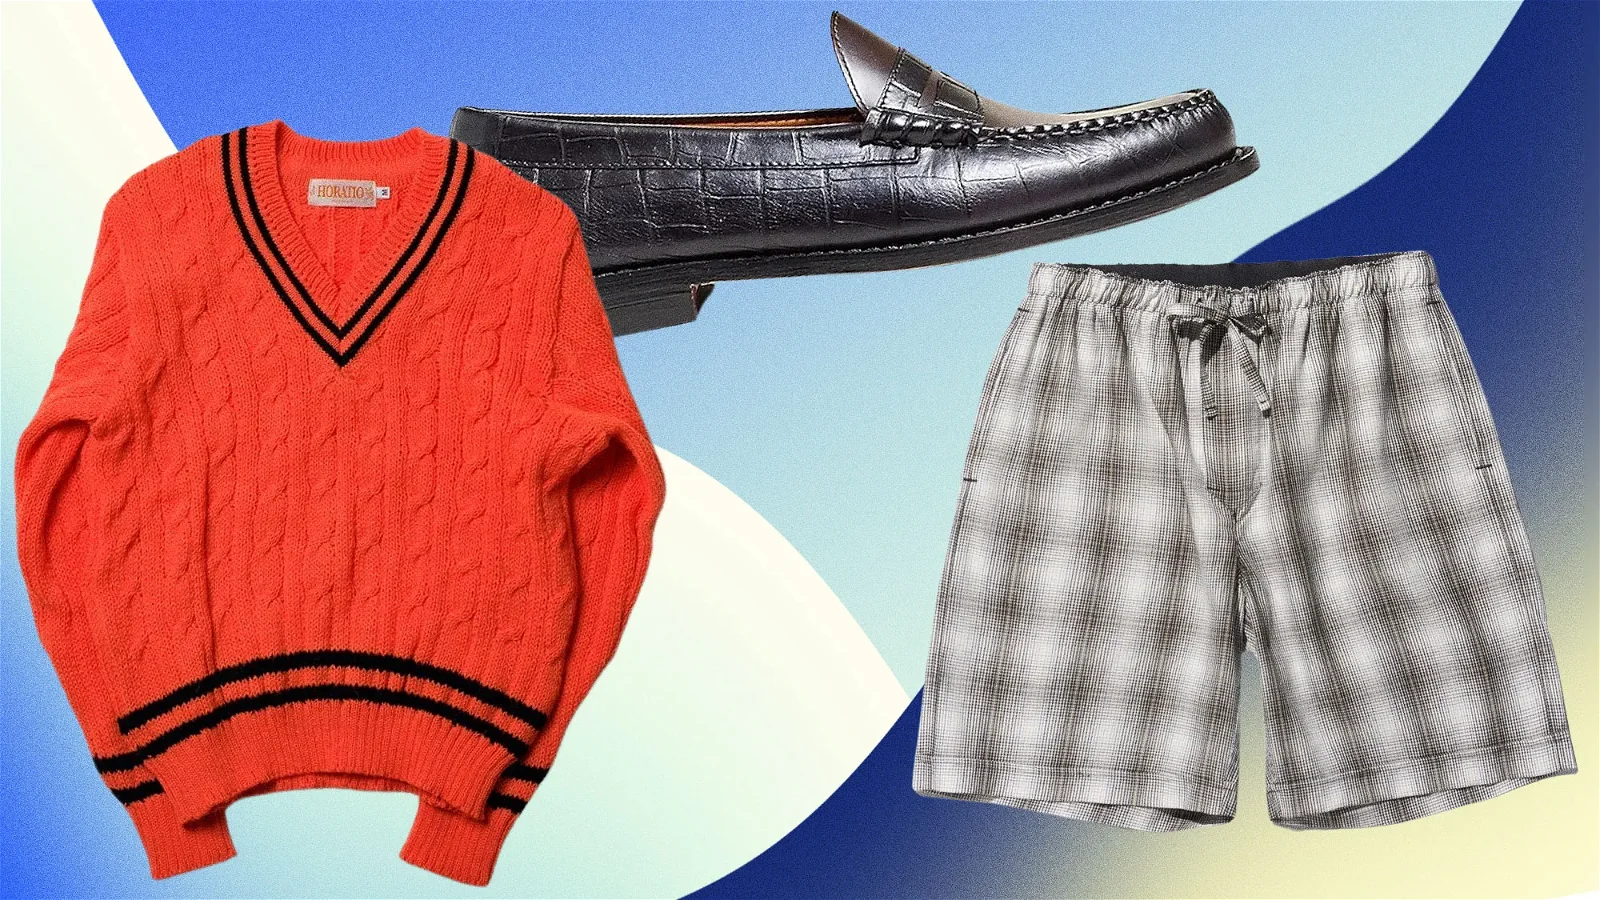 The 21 Best New Menswear Items to Buy This Week